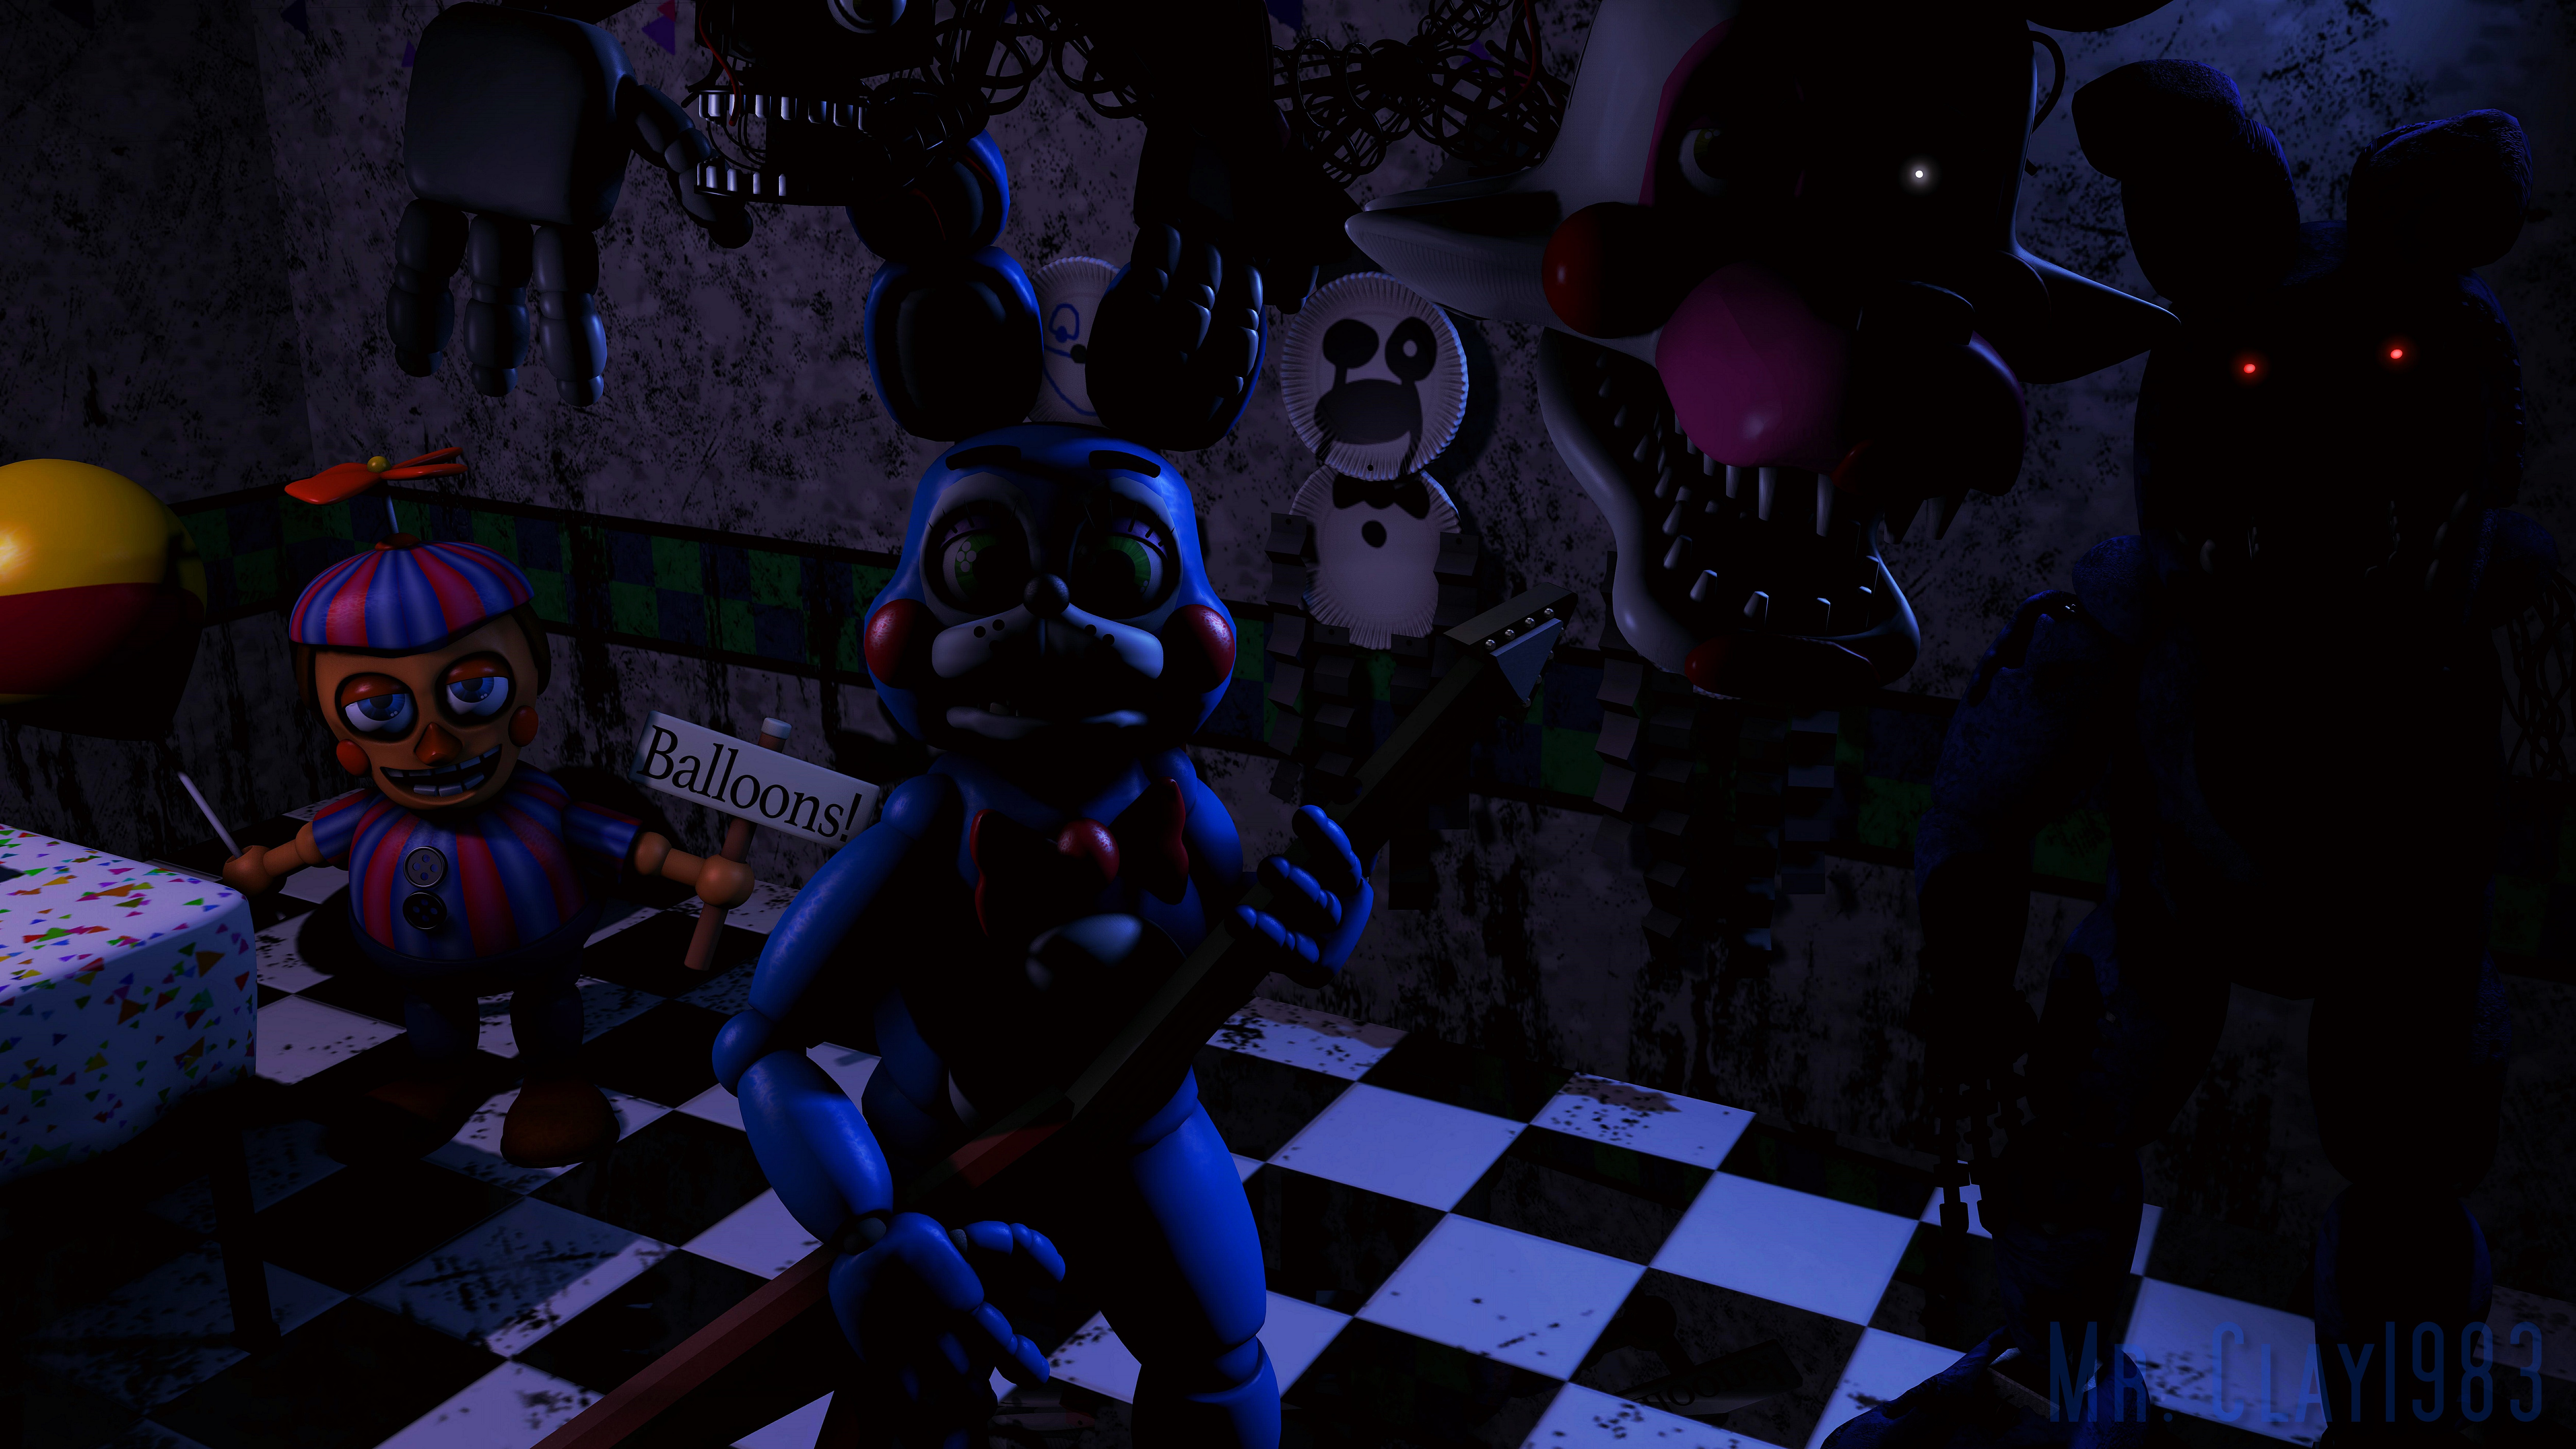 Fnaf 2 wallpaper for ipod/iphone/etc  Five nights at freddy's, Five  night, Freddy